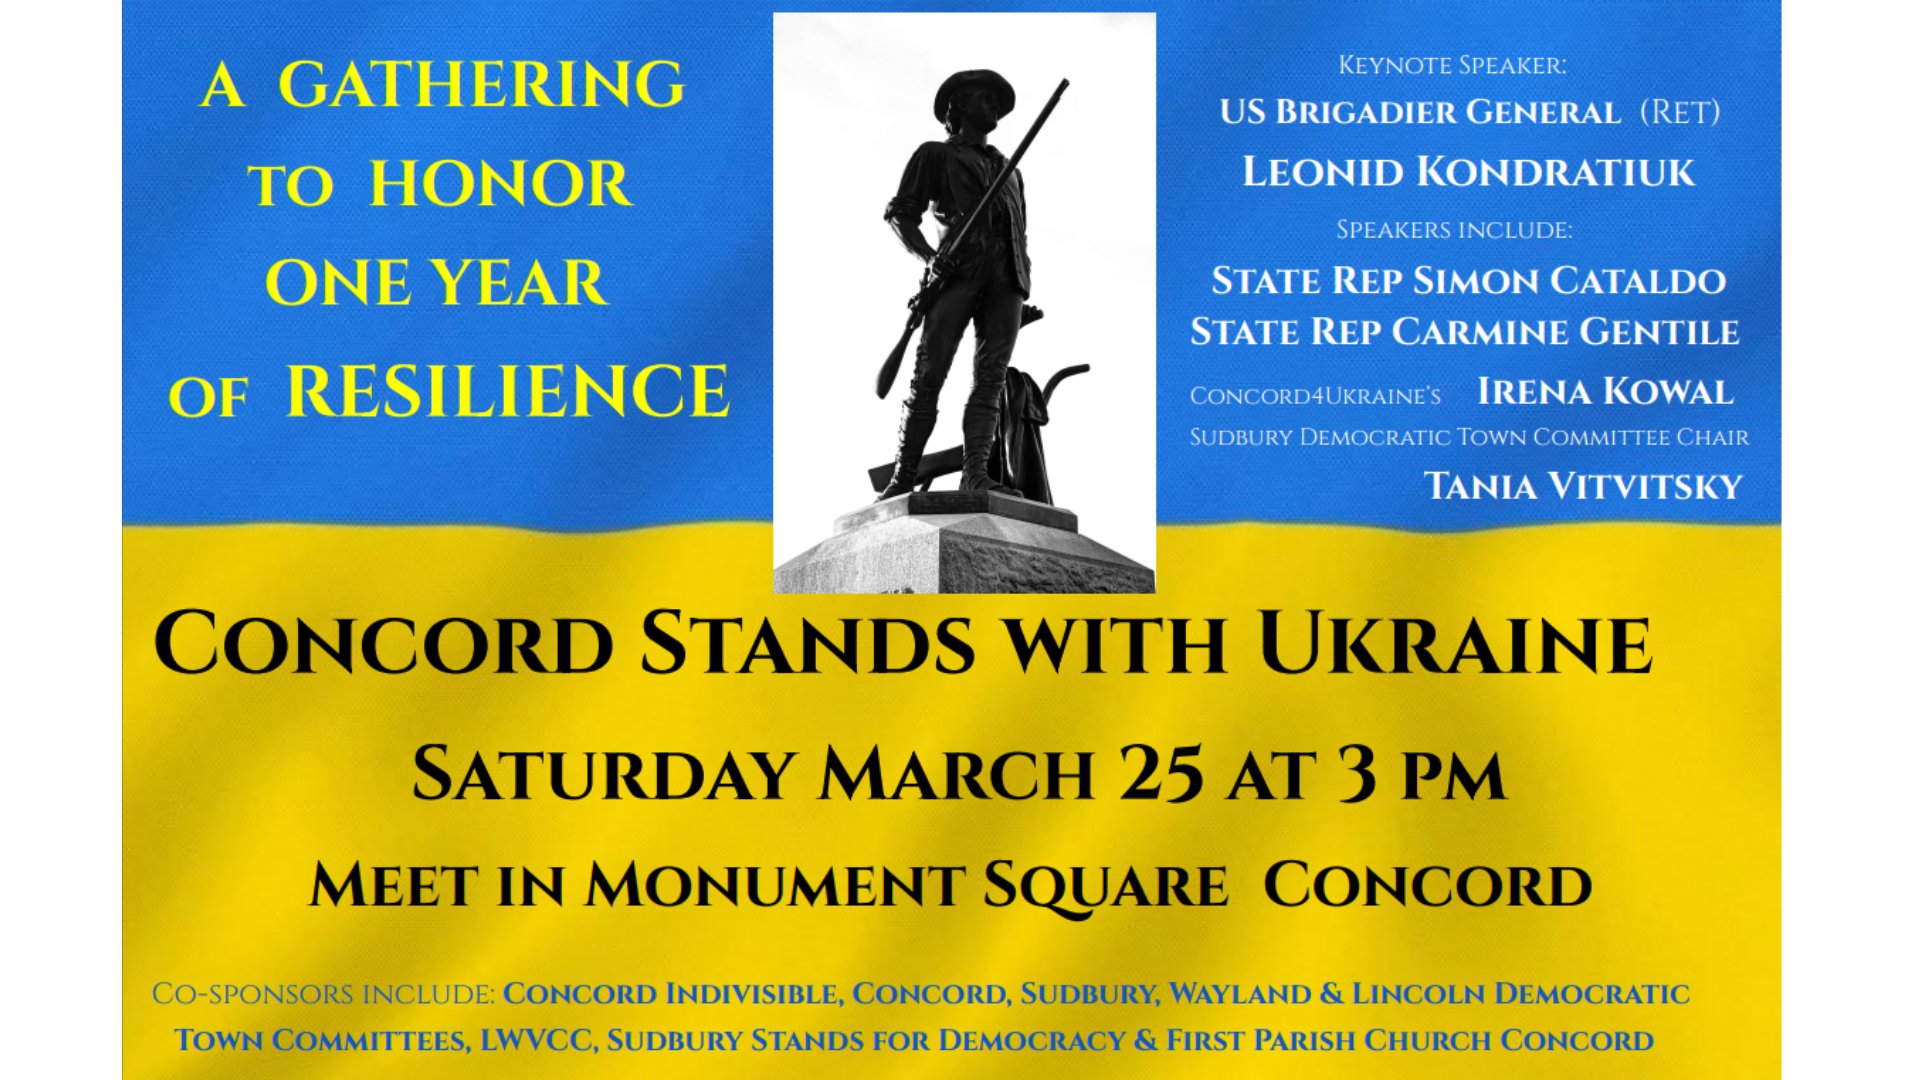 Concord stands with Ukraine